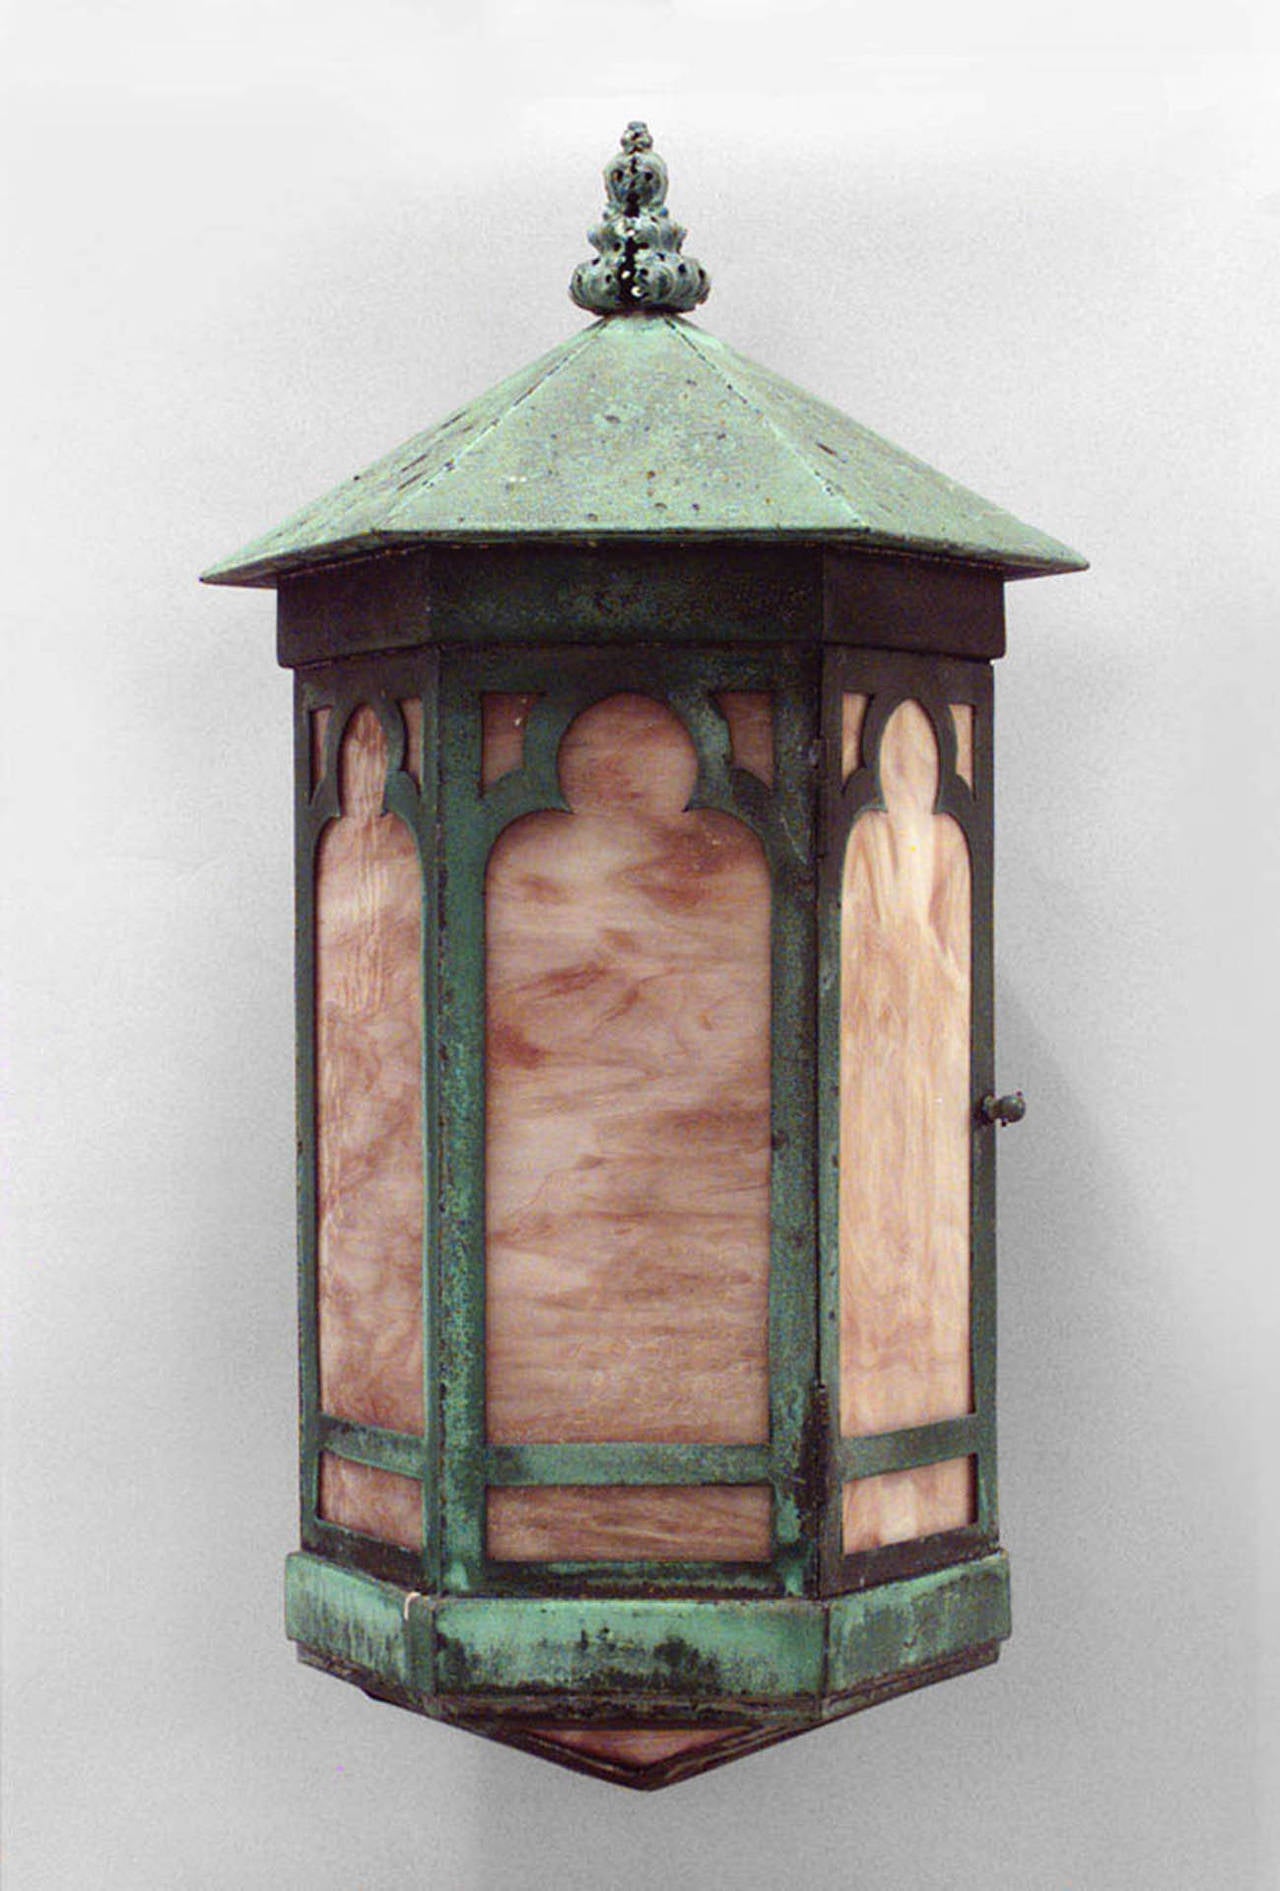 Pair of 19th century American green patinated copper outdoor 6-sided hanging lanterns with arch designs and colored glass panels and finial tops.